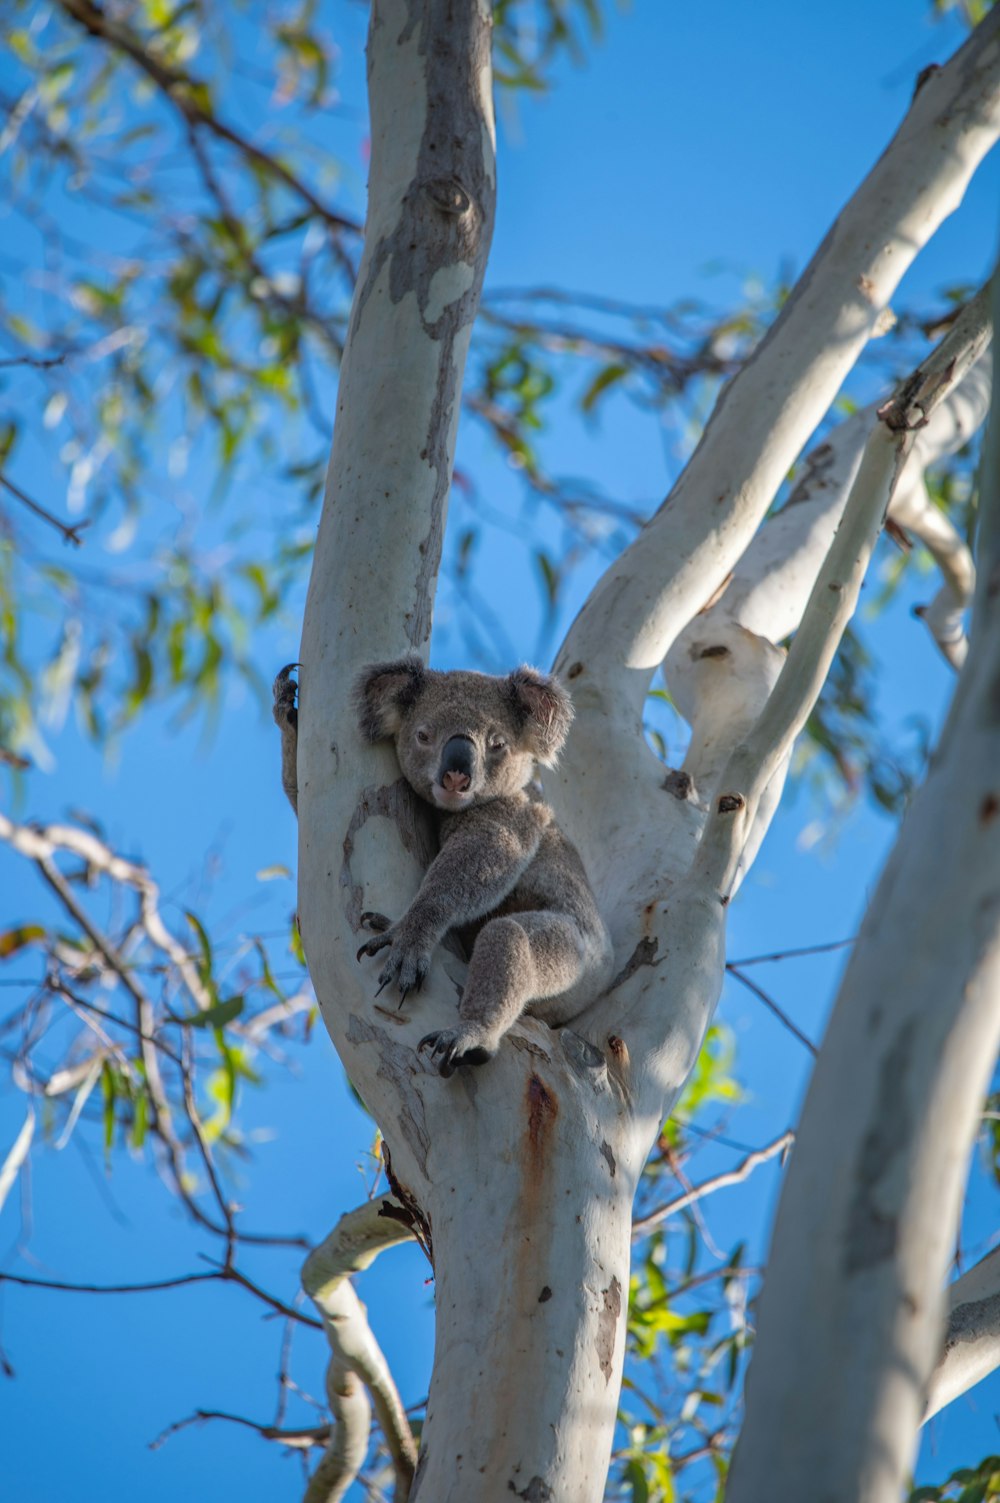 a koala sitting in a tree with a blue sky in the background